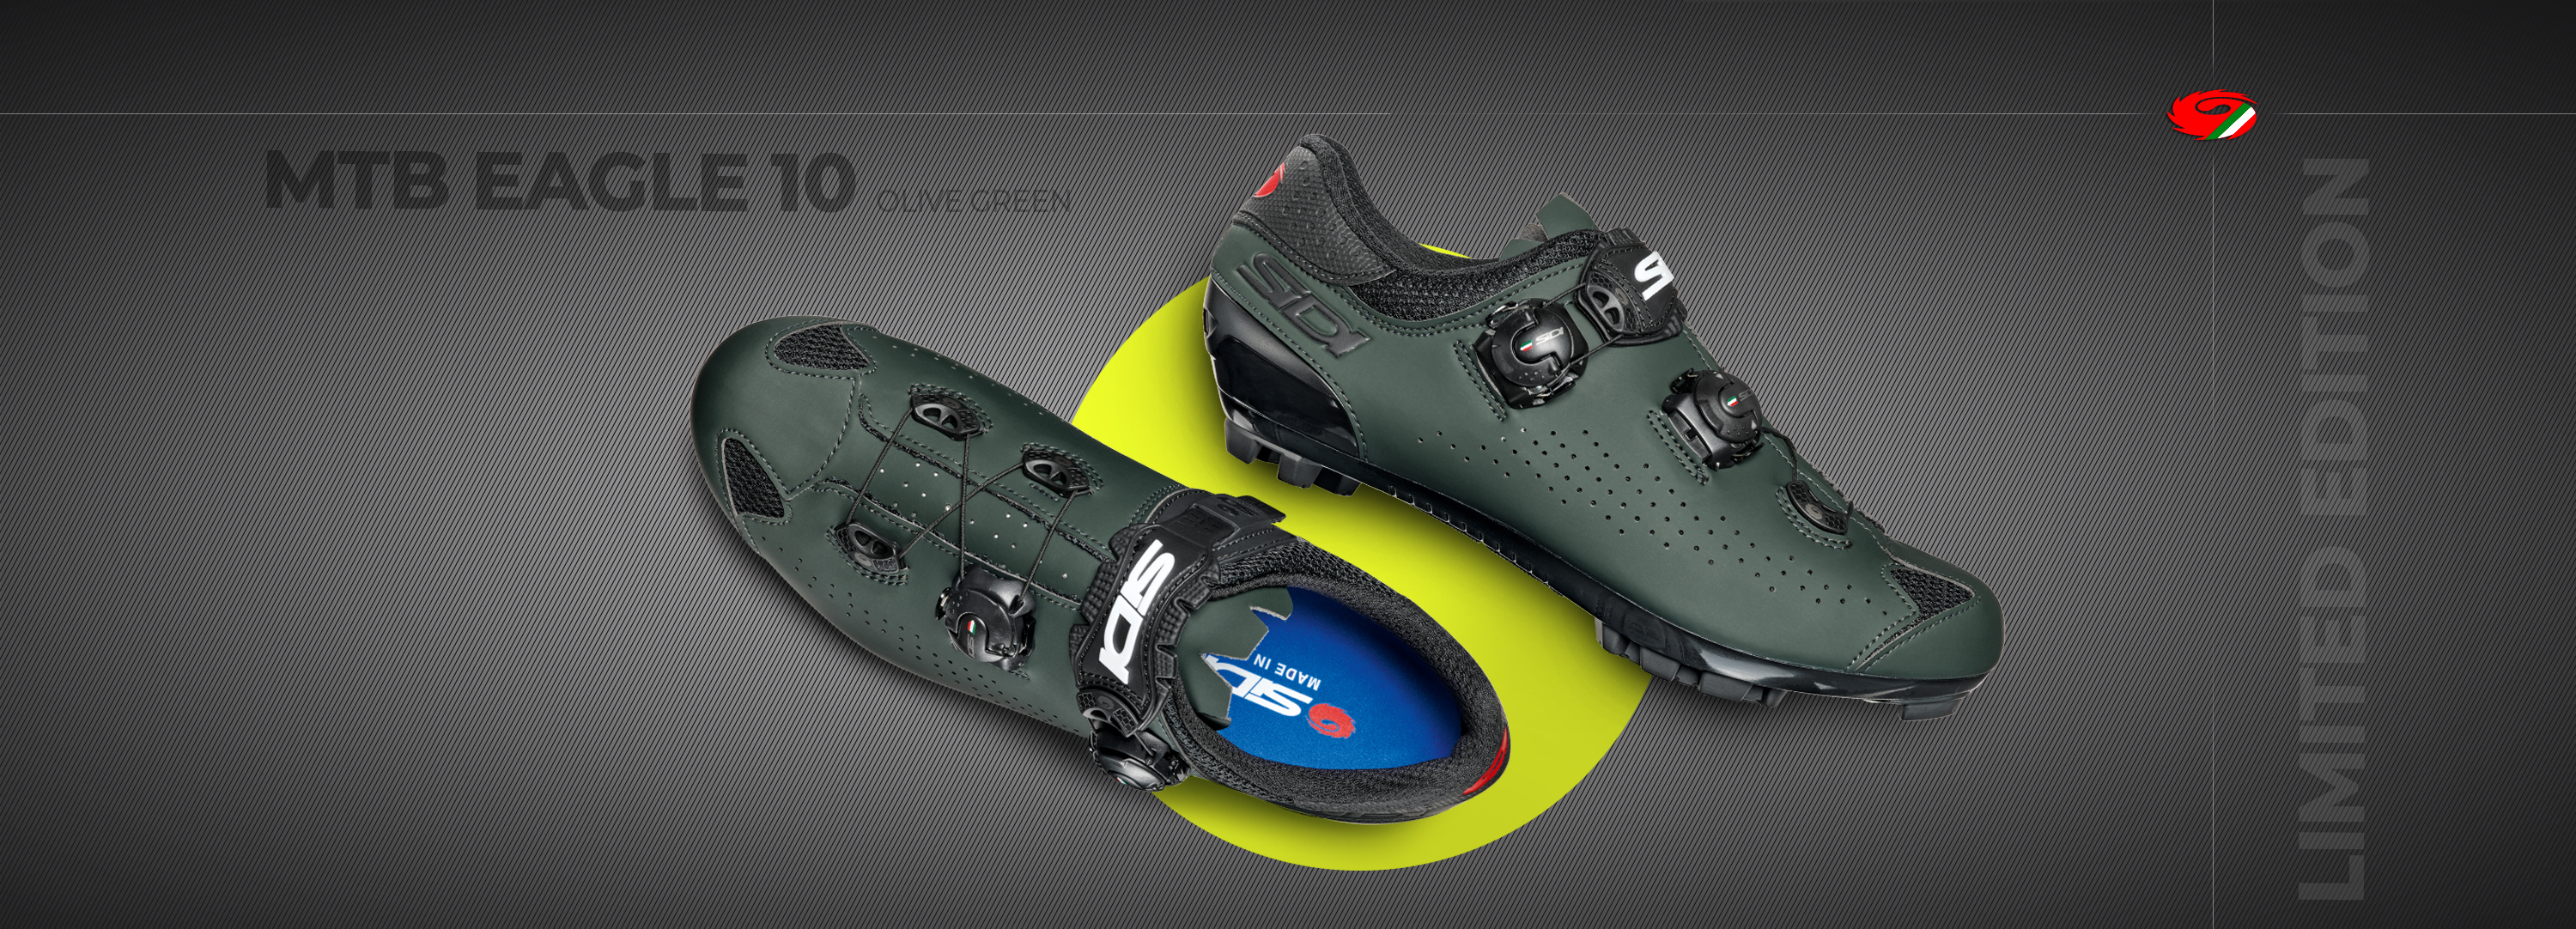 voormalig Sada lever Sidi launches a new nature-inspired colour for the MTB-Eagle 10 - Sidi  Sport S.r.l.